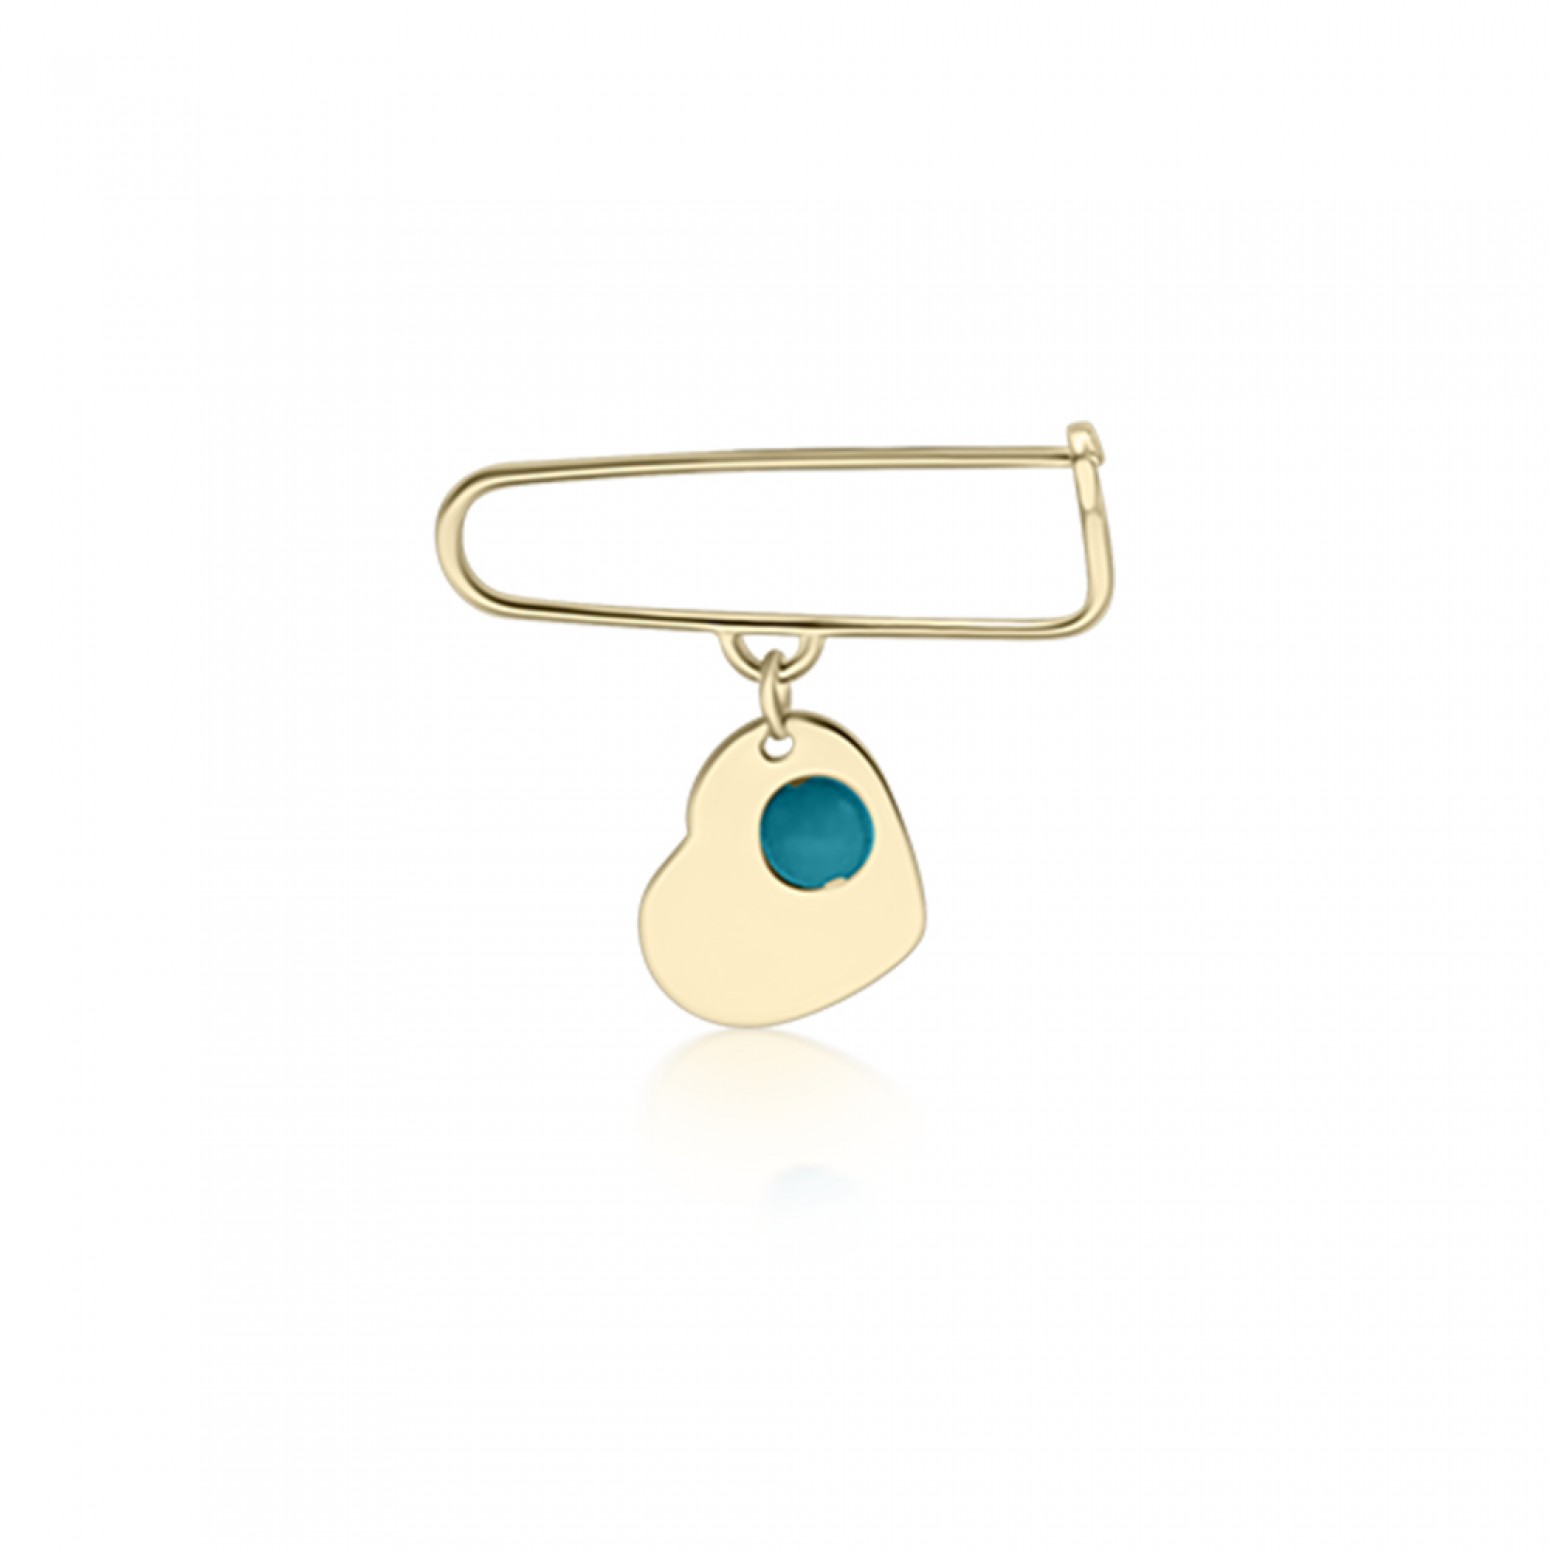 Babies pin K14 gold with heart and turquoise pf0140 BABIES Κοσμηματα - chrilia.gr